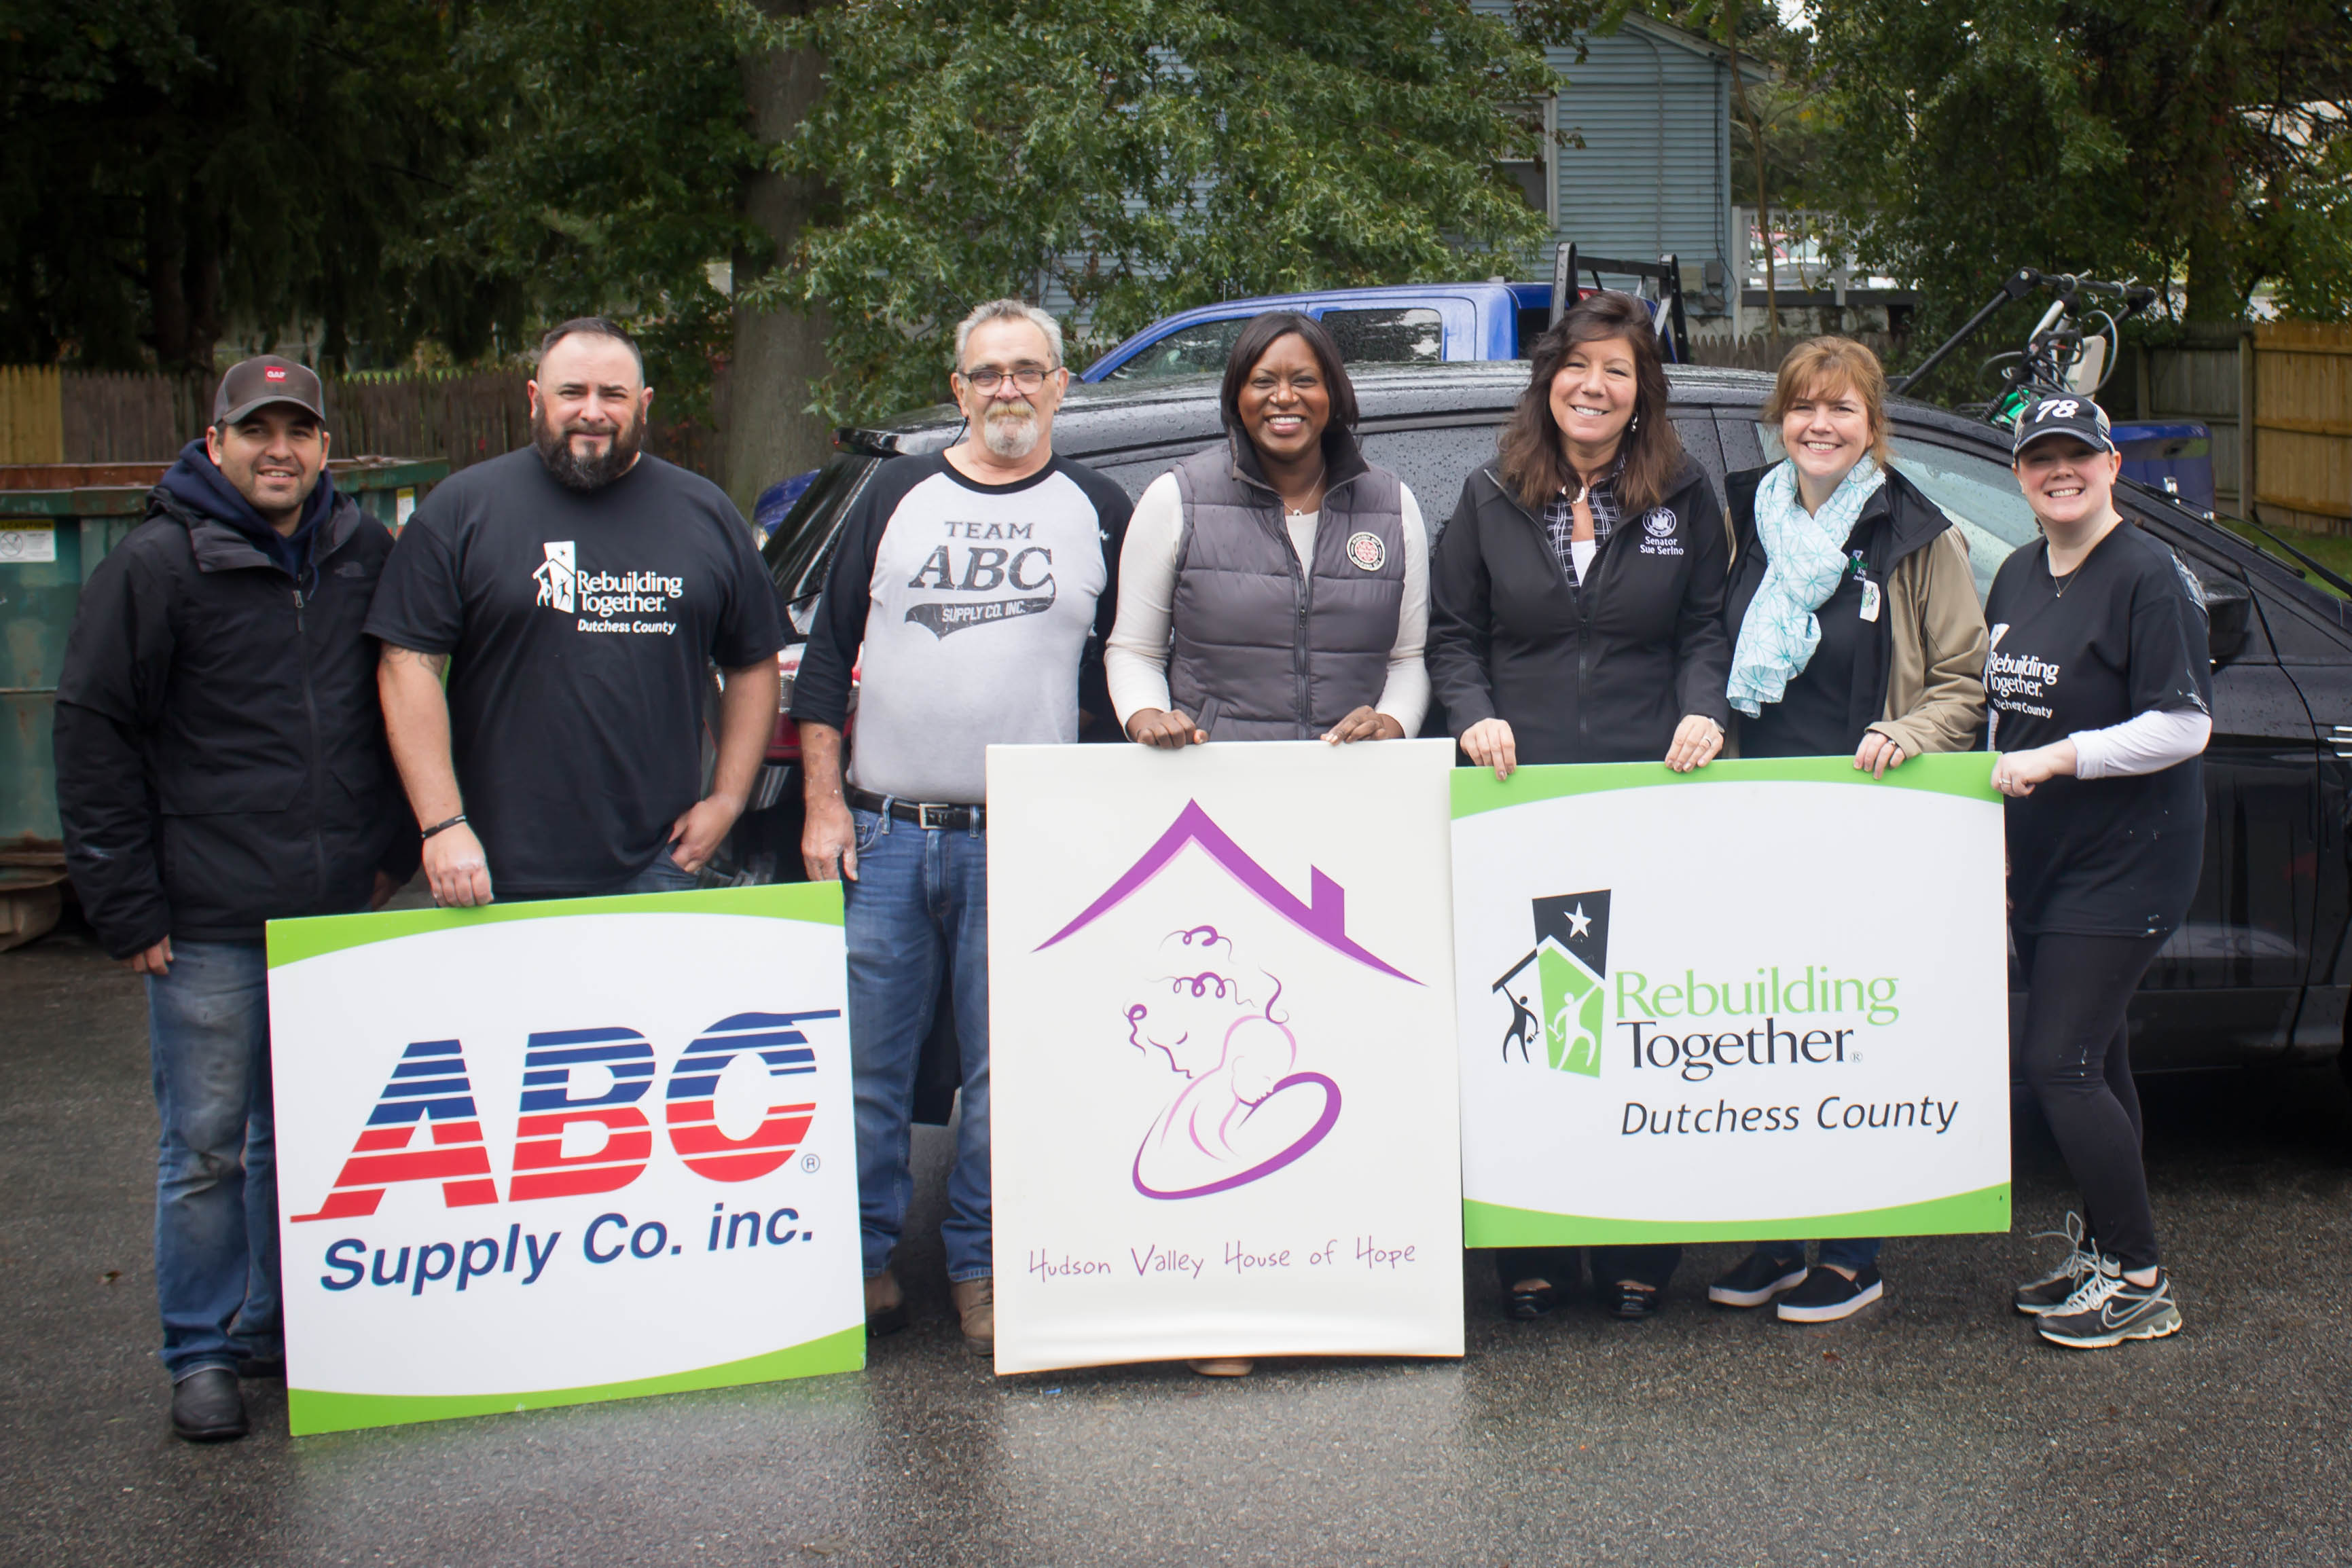 Scott with the Team at ABC Supply and Community Strong House of Hope Rebuild